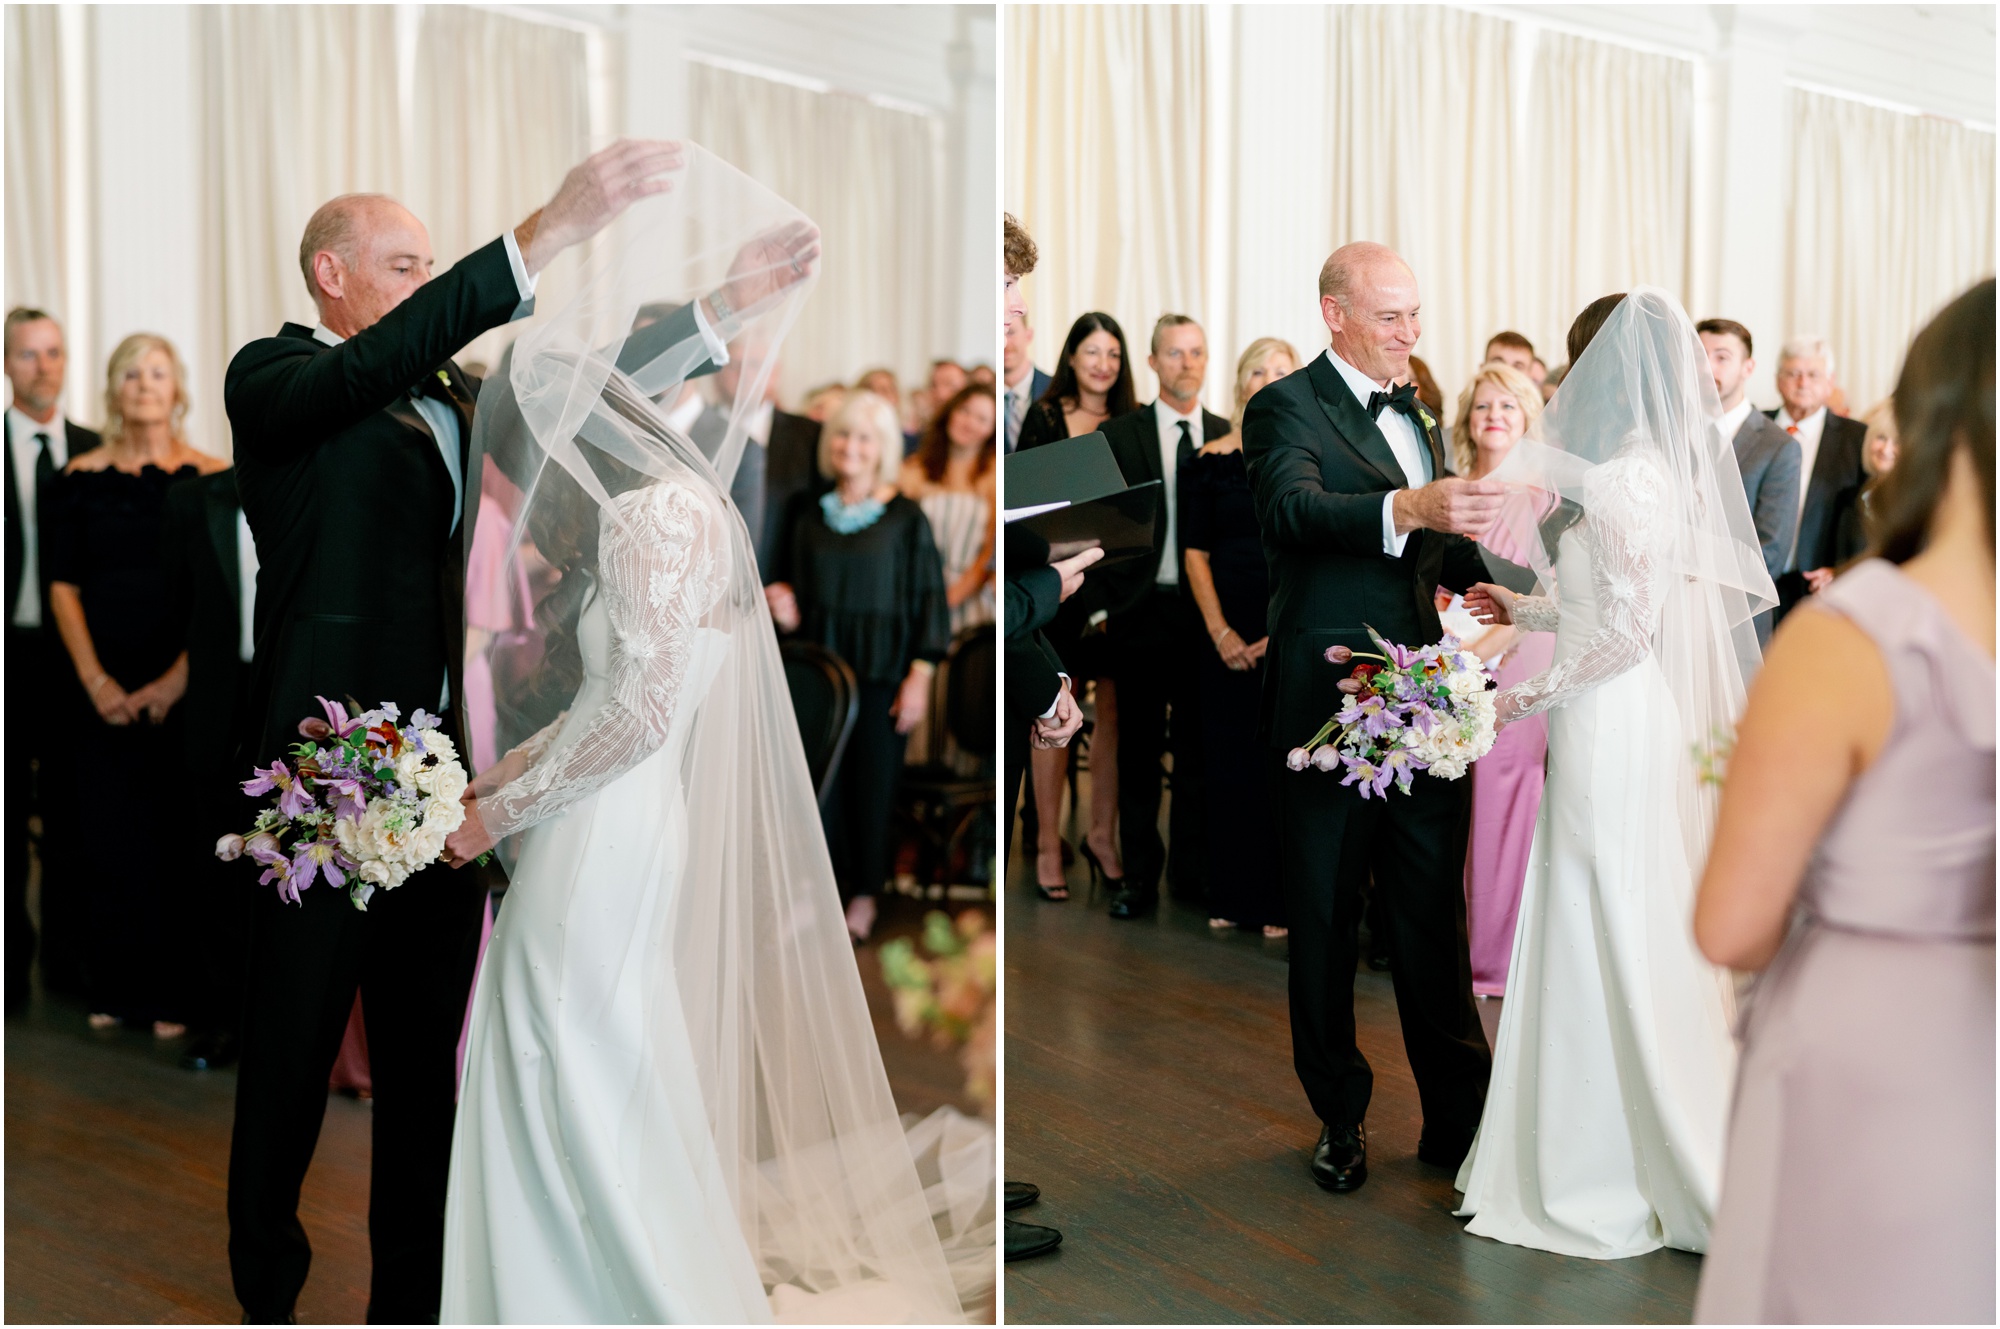 father taking veil off daughter at wedding ceremony